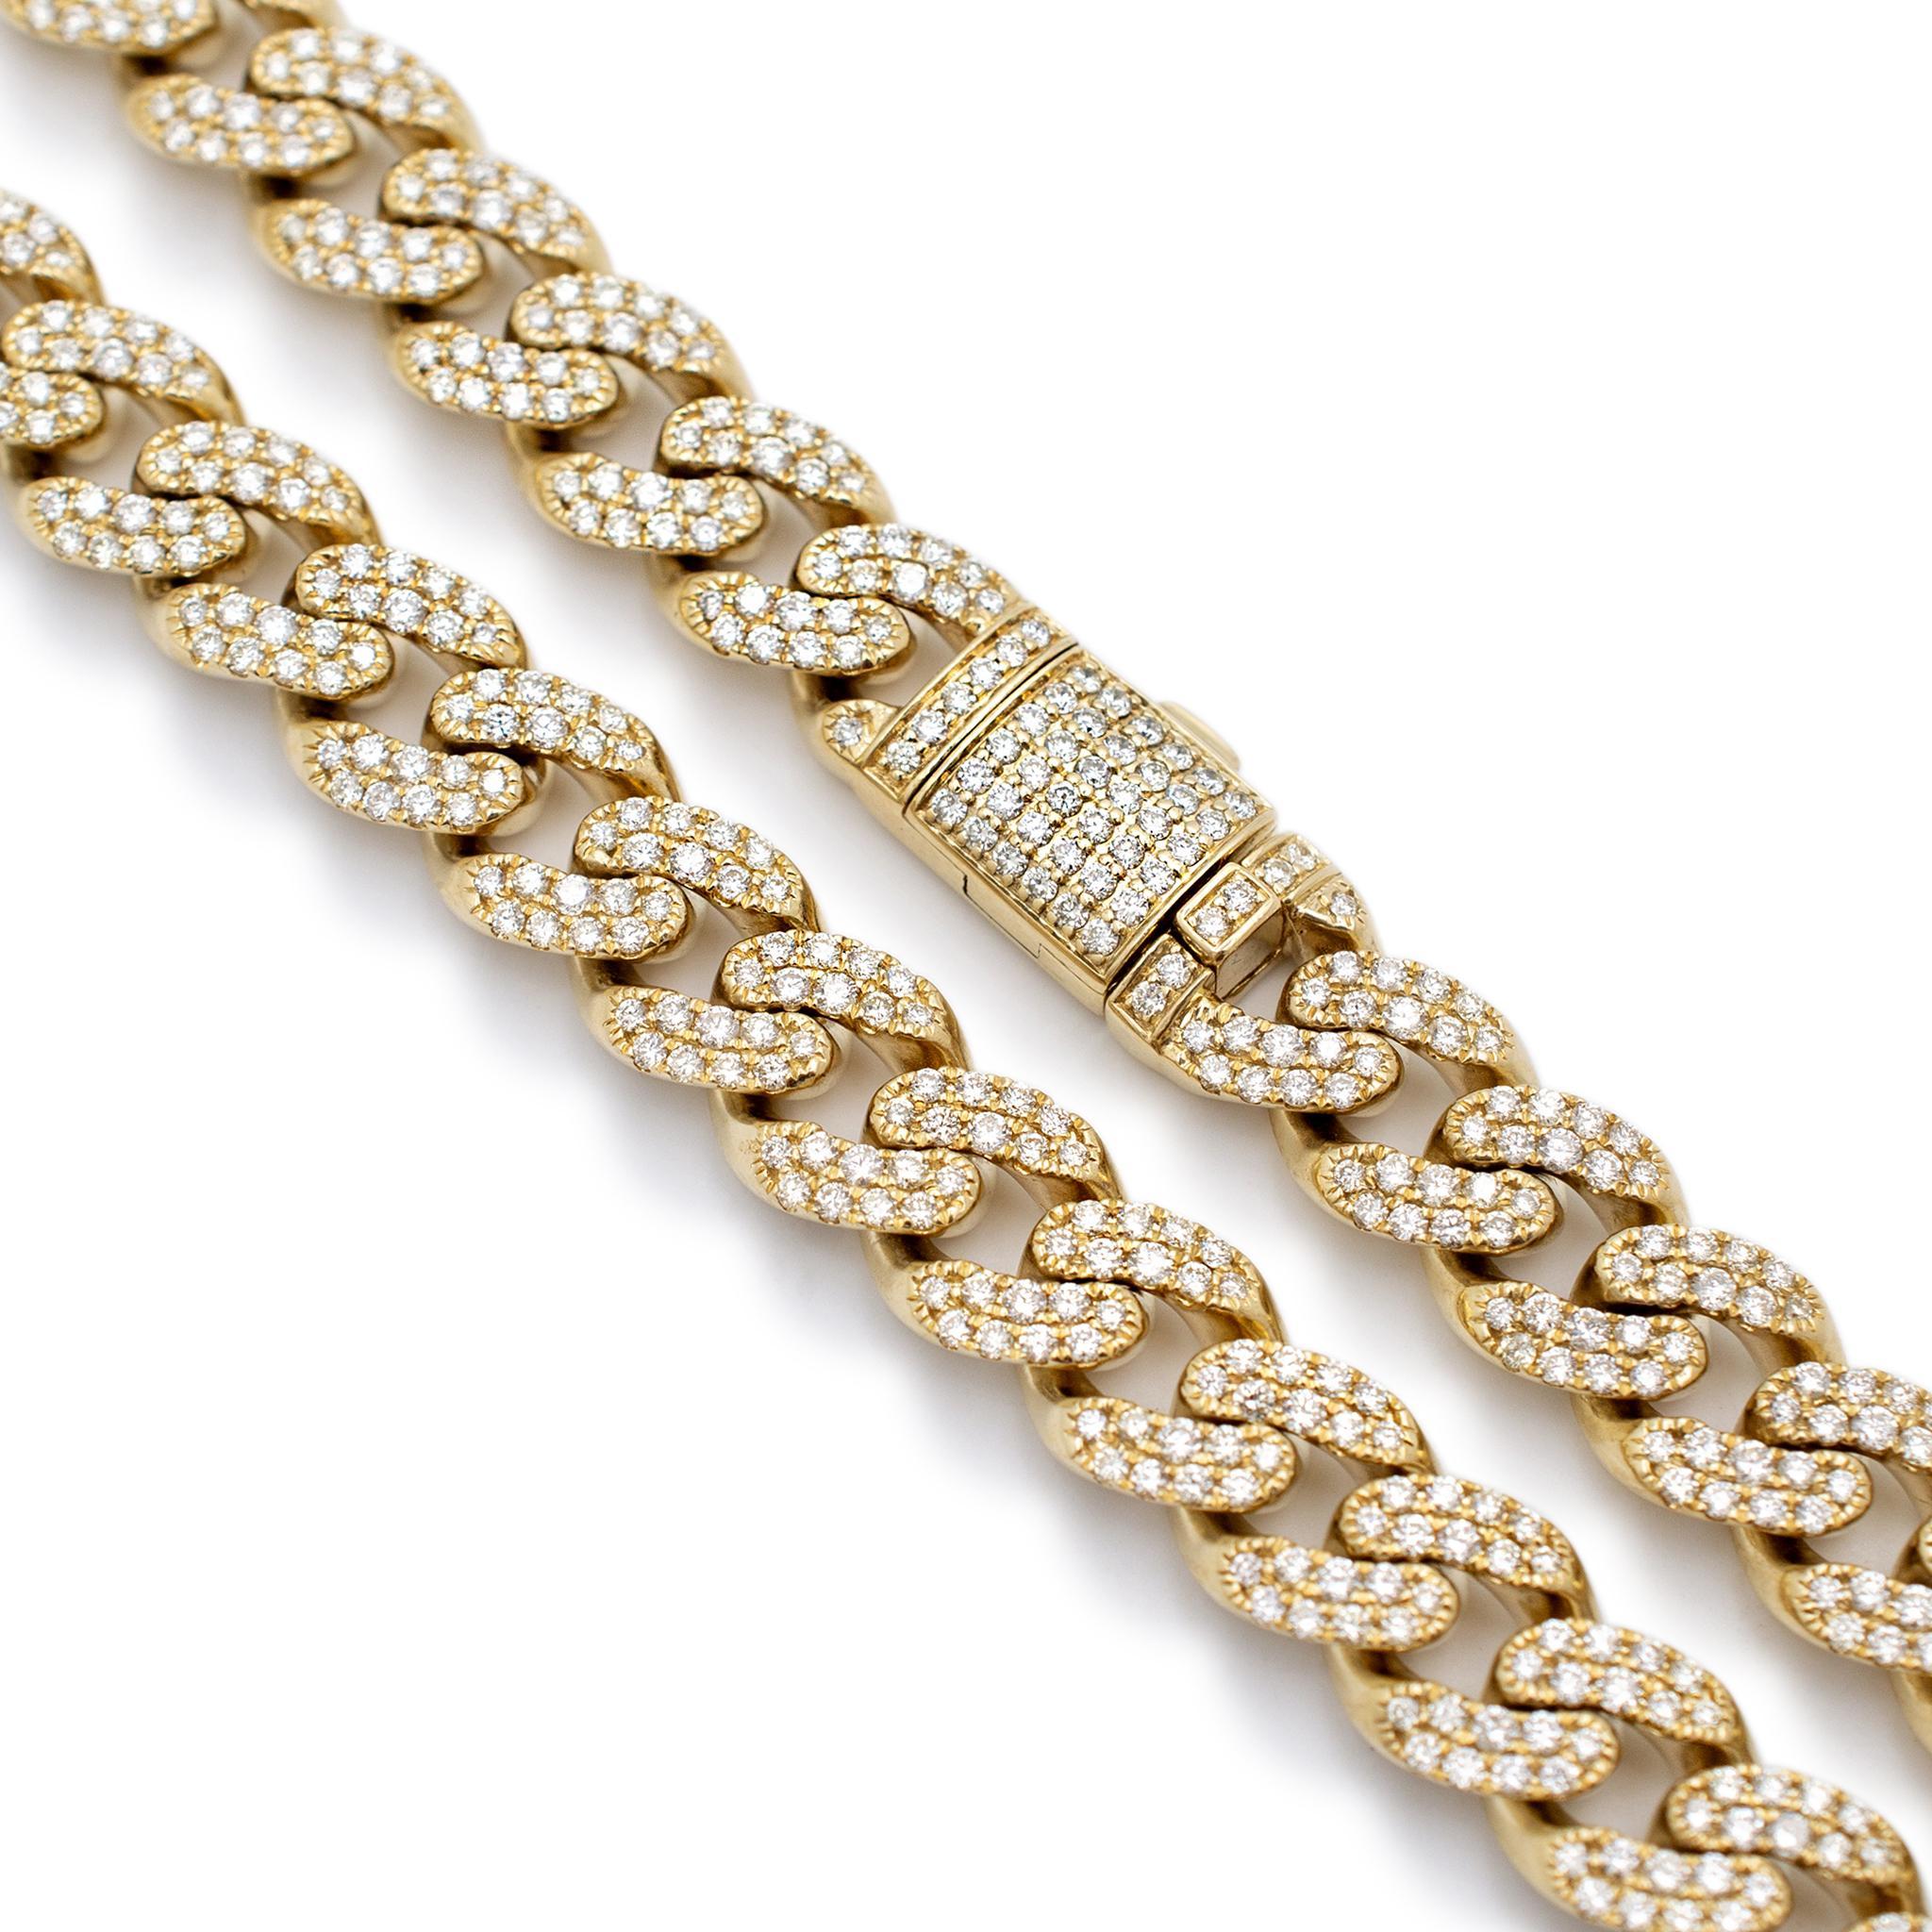 10K Yellow Gold 15.08ct Pave Diamond Cuban Link Chain Necklace In Excellent Condition For Sale In Houston, TX